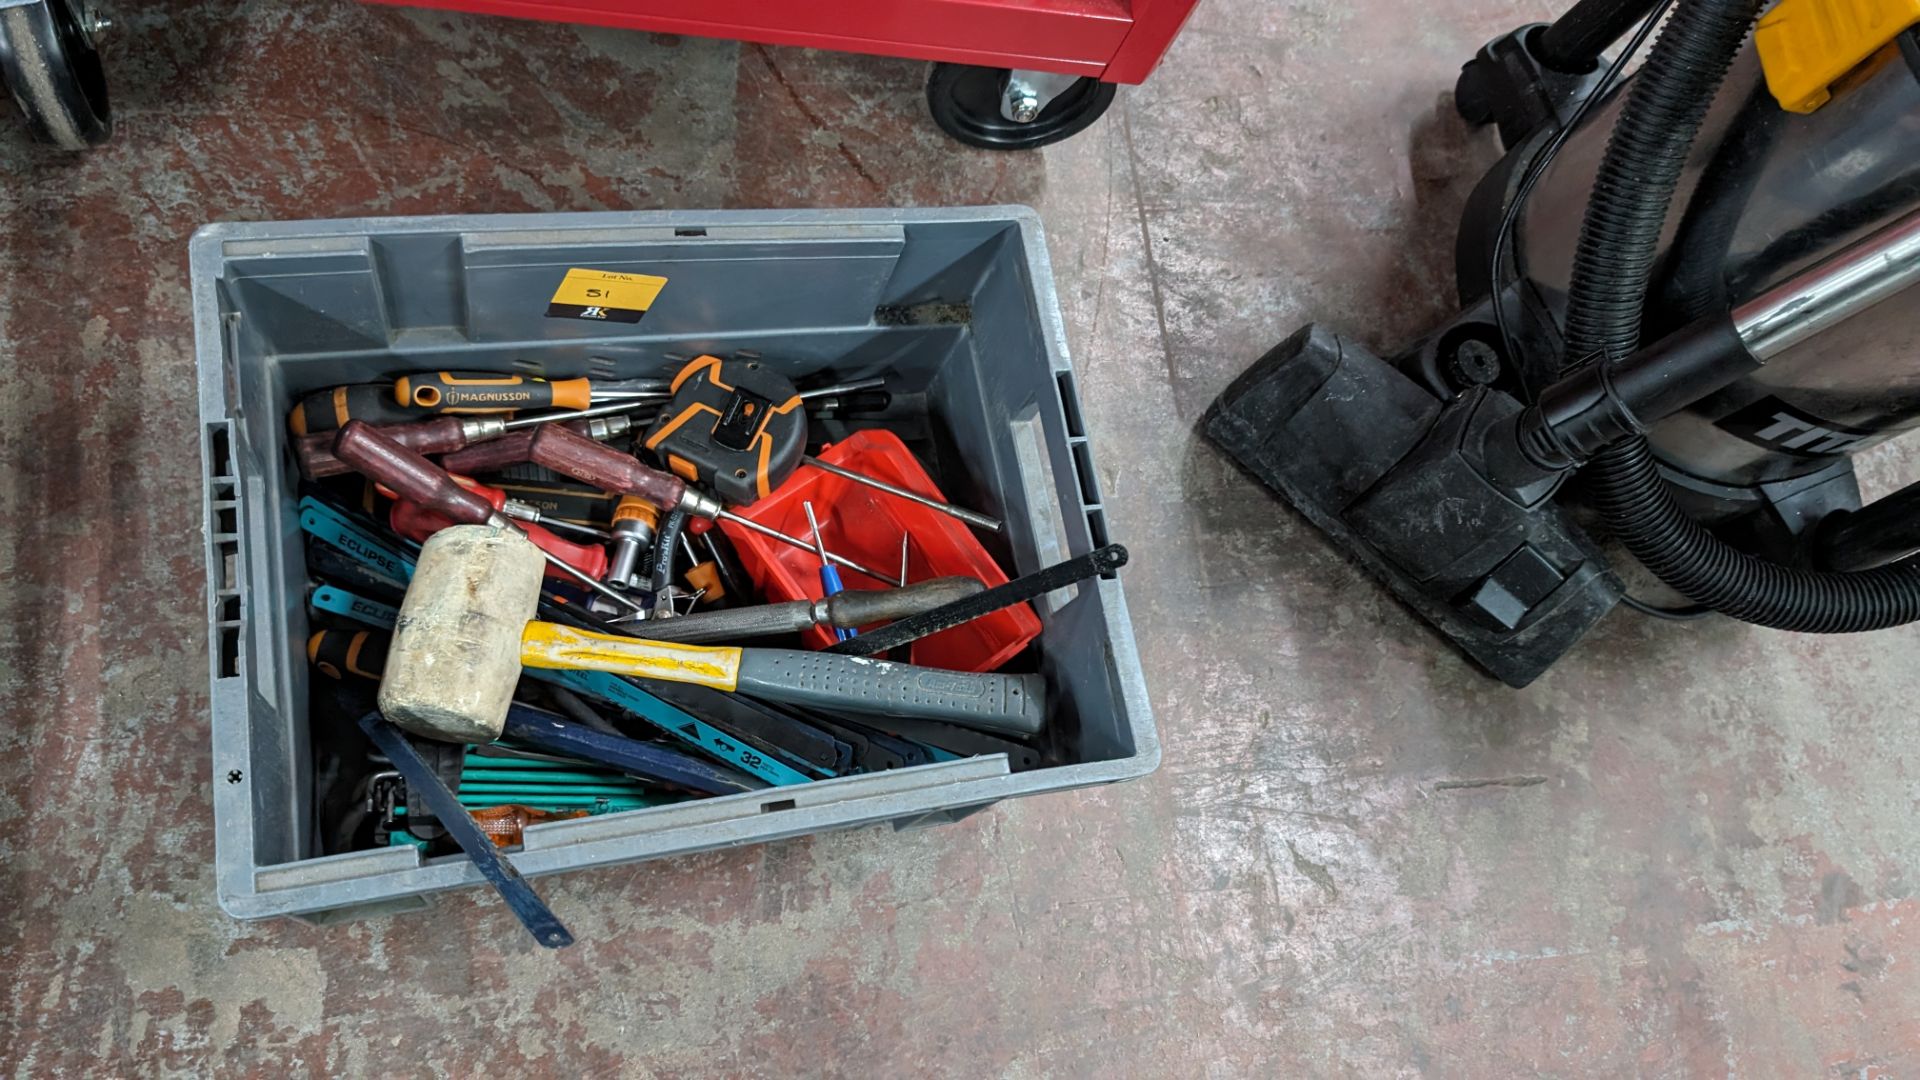 The contents of a crate of Allen keys, hand tools & more